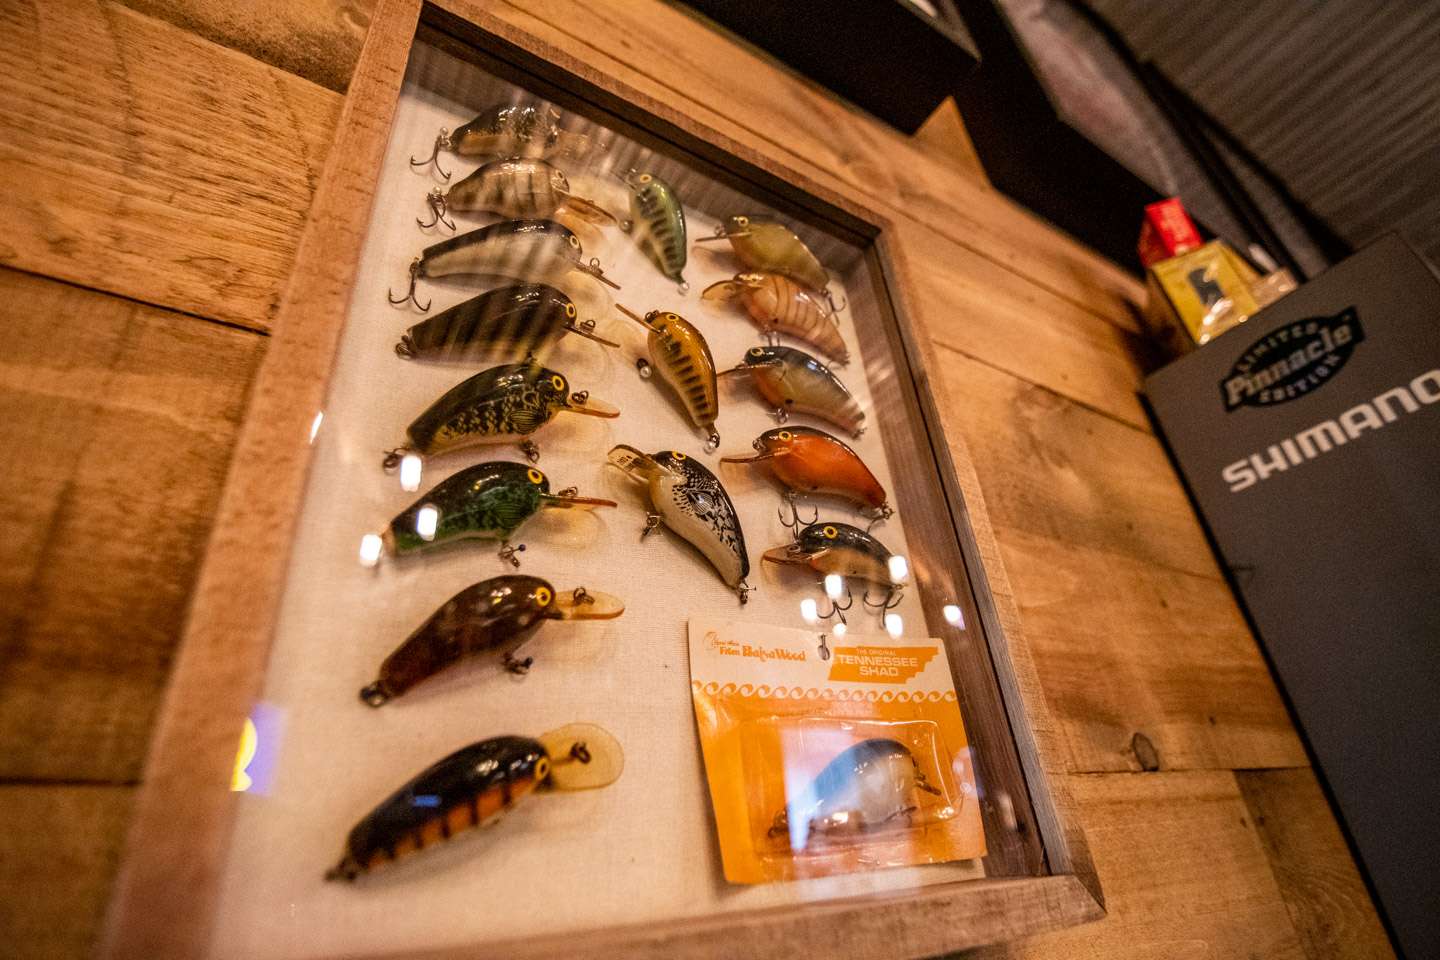 More Tennessee Shads baits hang in a small case on the wall. “I’m starting to run out of room for all my baits,” Auten said. “I needed some place to display them, so I put that case together.”